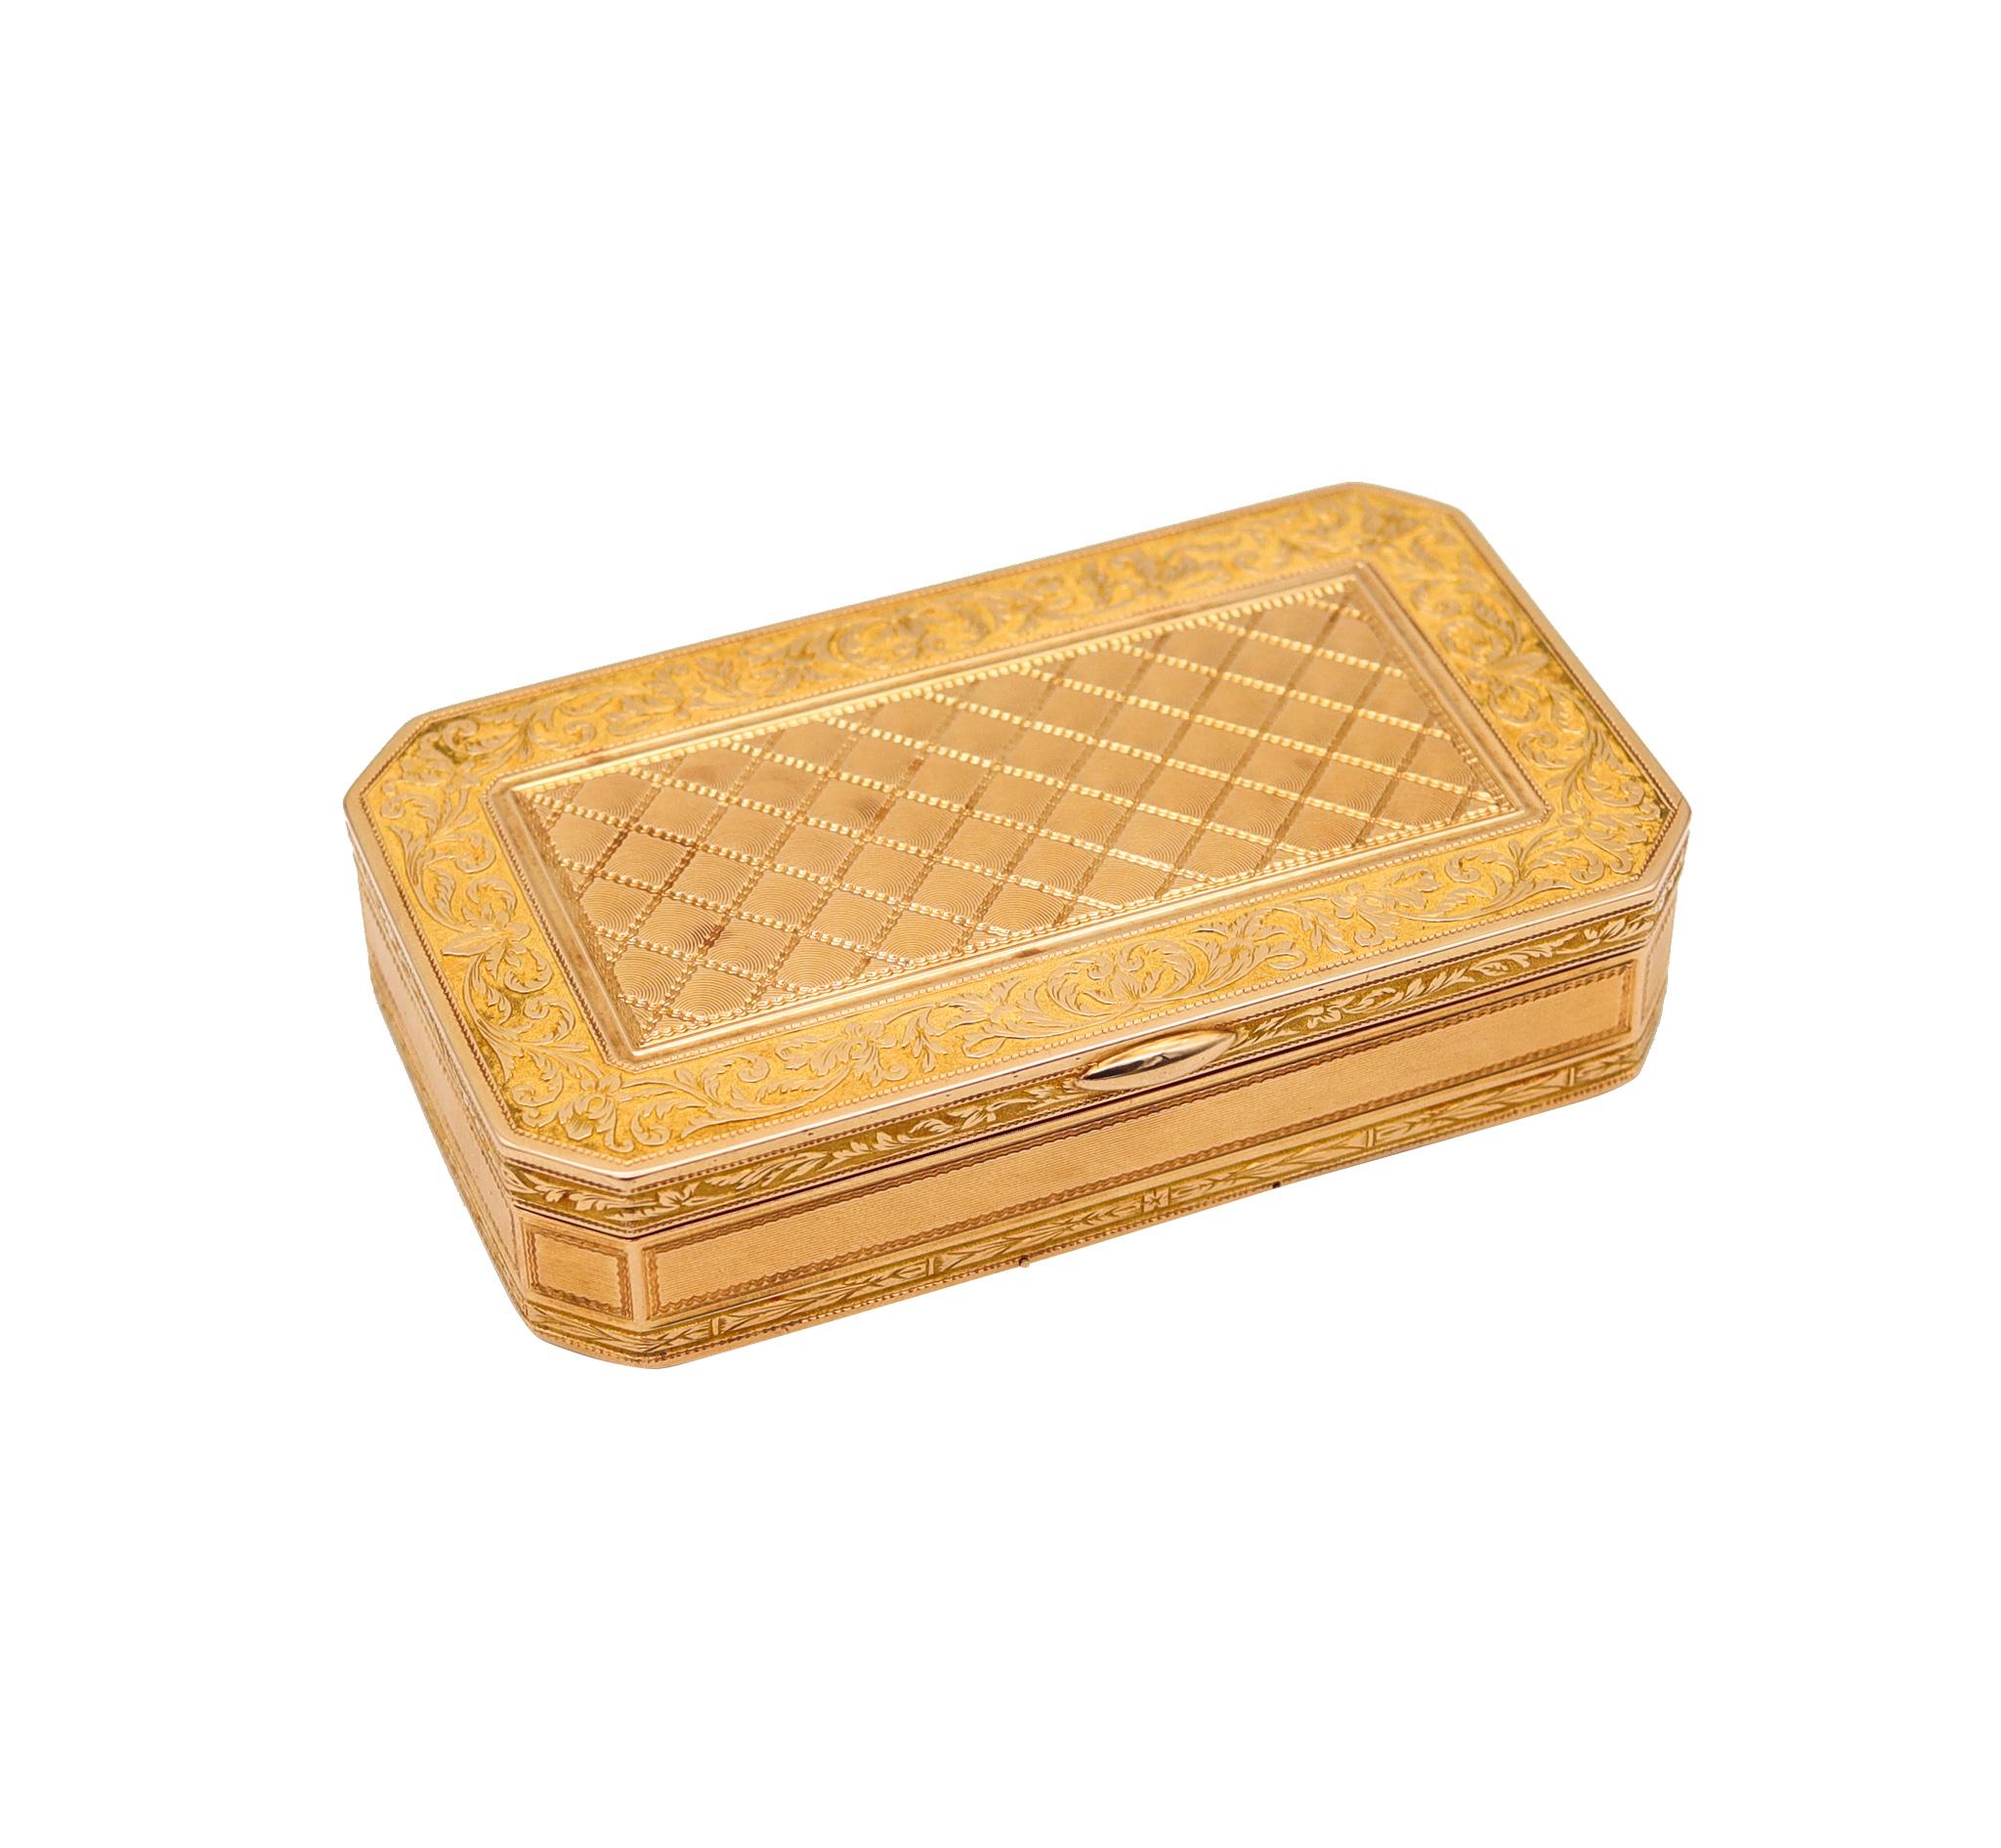 French 1819-1838 Neoclassical Louis XVI Rectangular Snuff Box Labrated 18kt Gold In Excellent Condition For Sale In Miami, FL